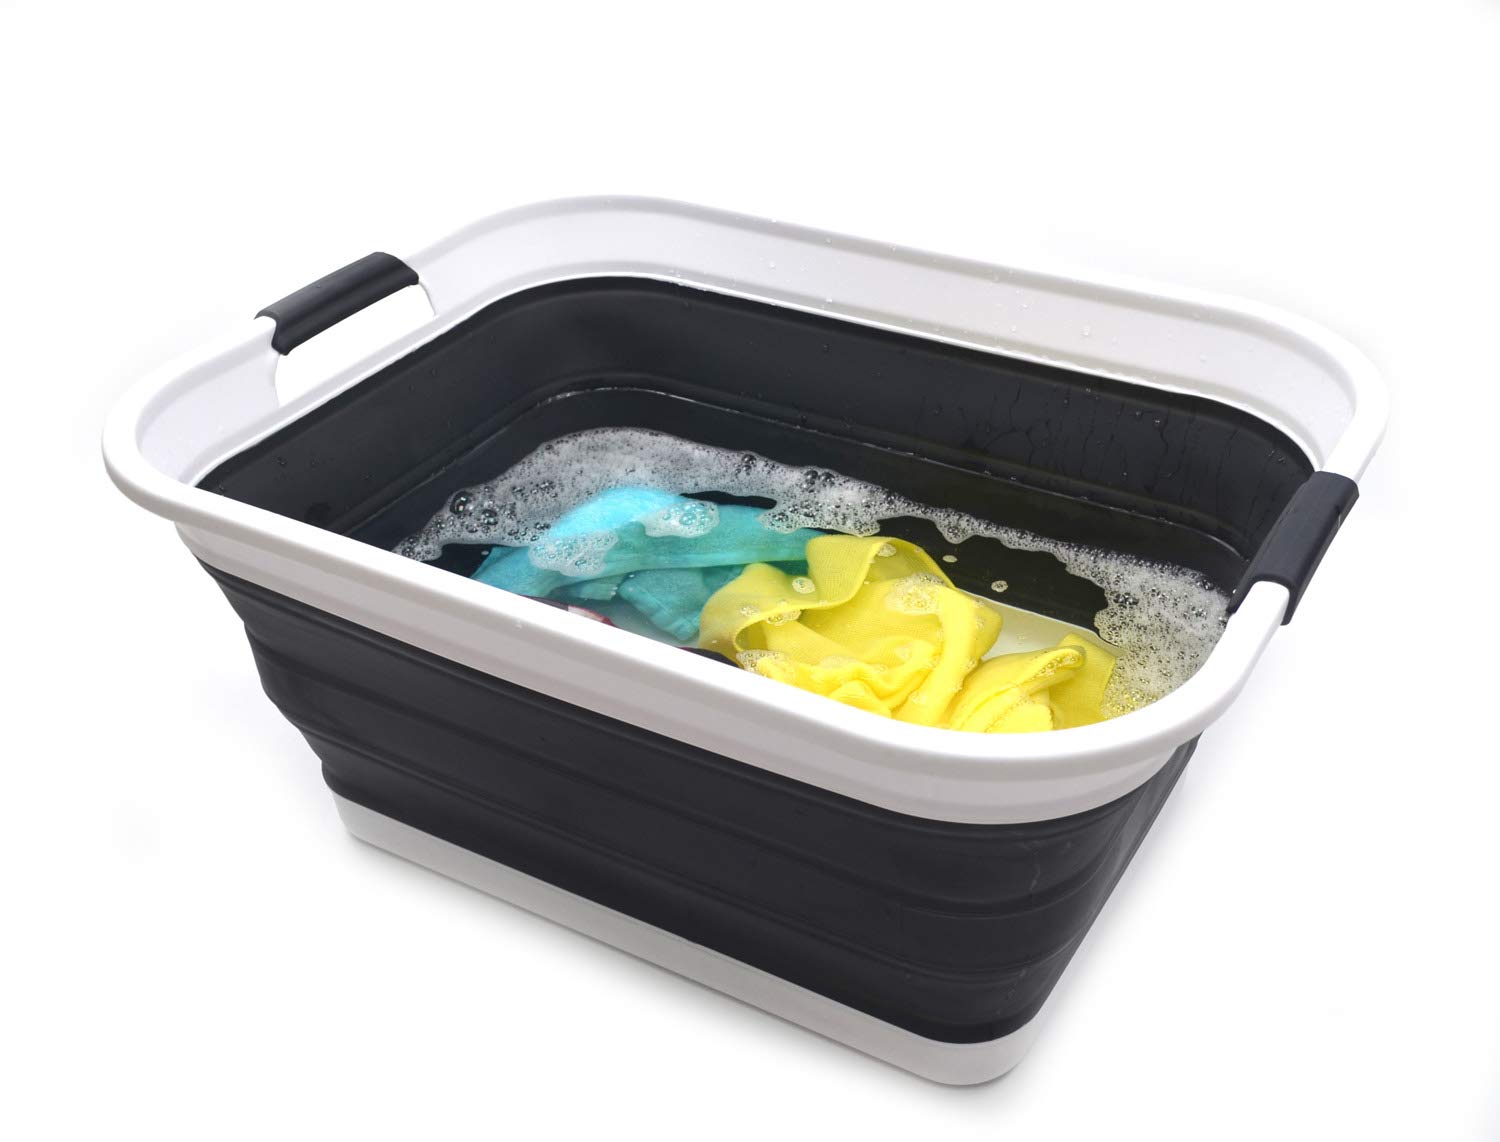 SAMMART 42L(11 gallon) Set of 2 Collapsible Plastic Laundry Basket-Foldable Pop Up Storage Container-Portable Washing Tub-Space Saving,Water capacity 34L(9 gallon) (2 rectangular - strengthen, black)